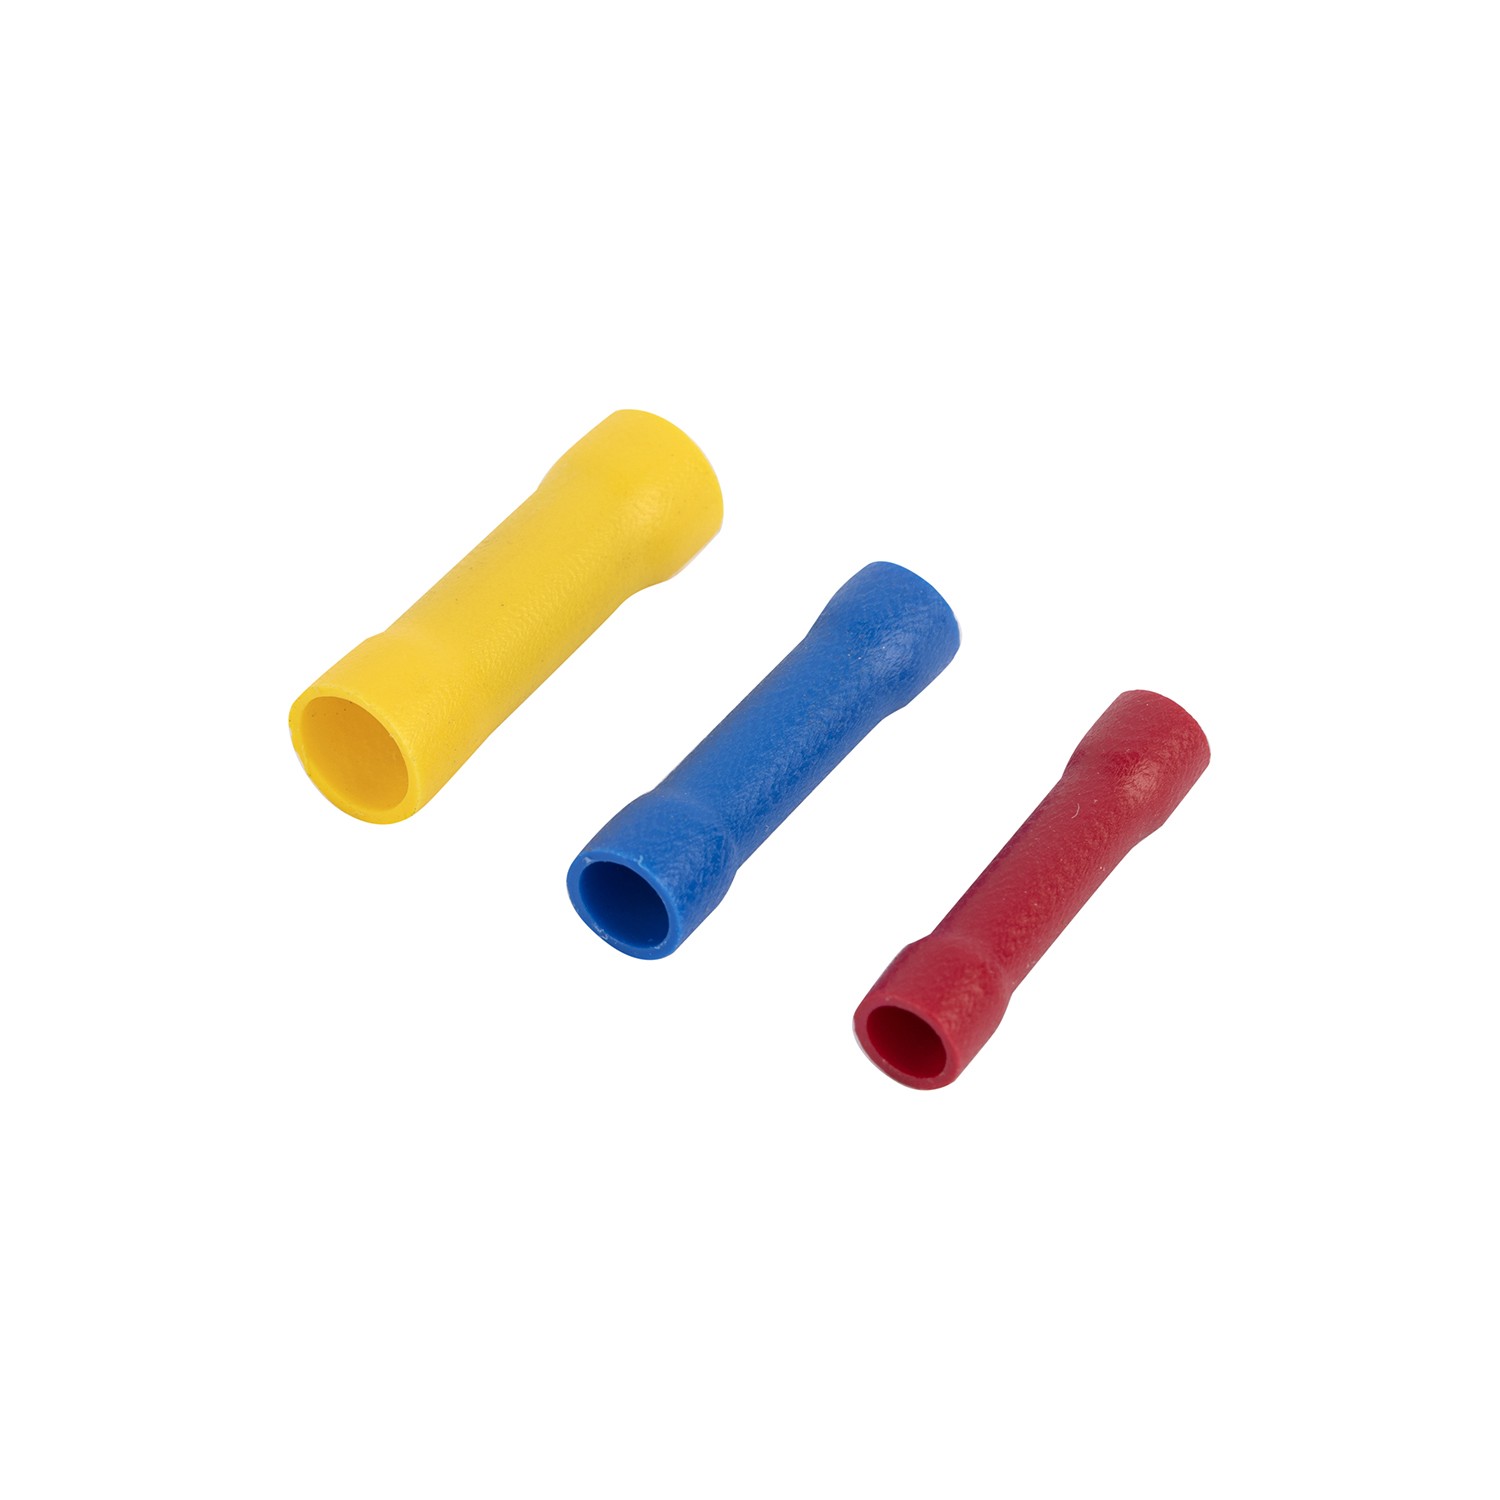 Insulated vinyl butt connectors for 22-16 AWG